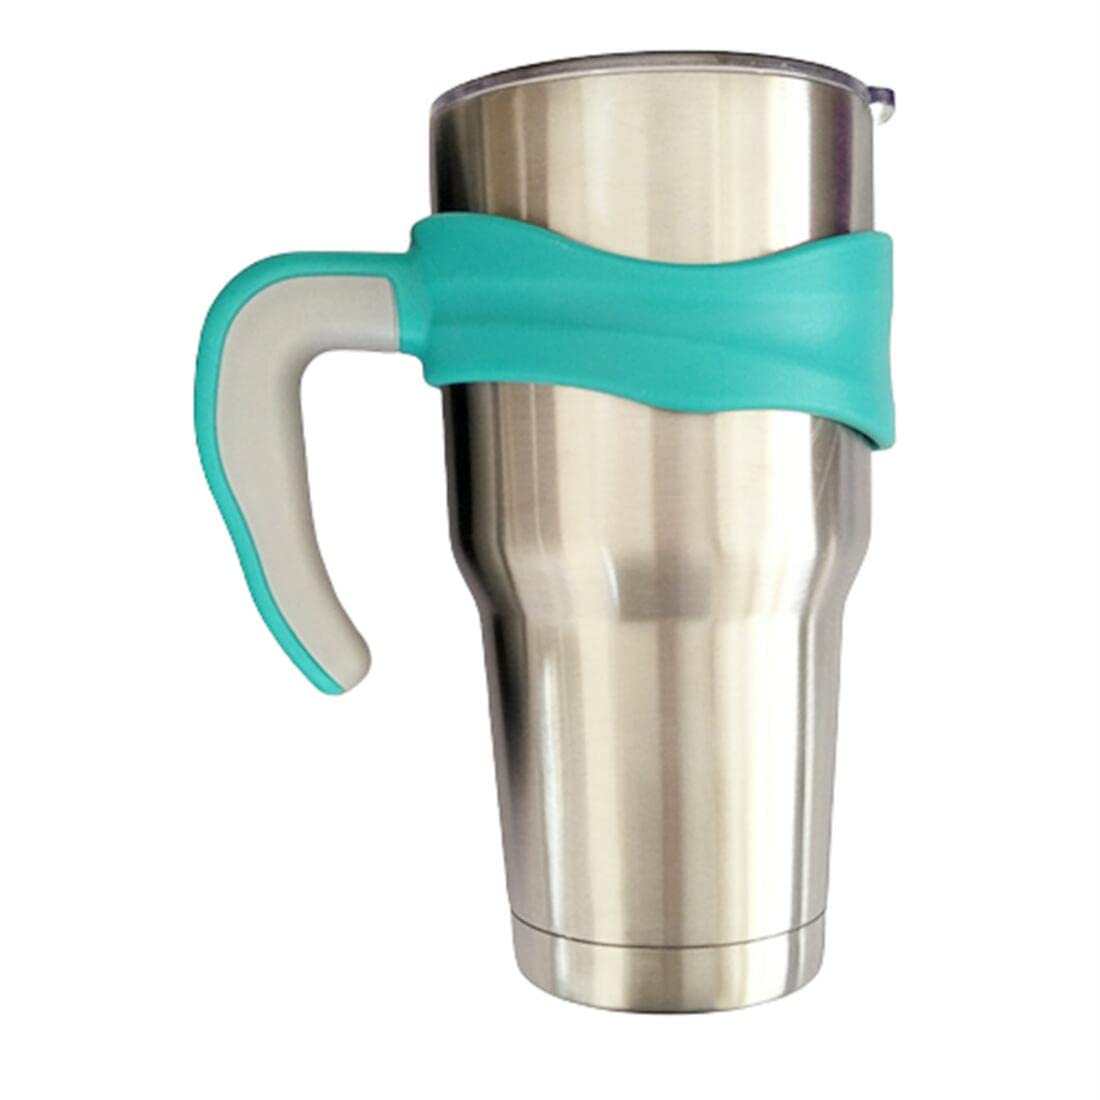 30 oz Tumbler Handle, Anti Slip Travel Mug Grip Cup Holder for Stainless Steel Tumblers, Suitable for Trail, Sic, Yeti, Ozark and More 30 Ounce Tumbler Mugs (Turquoise)